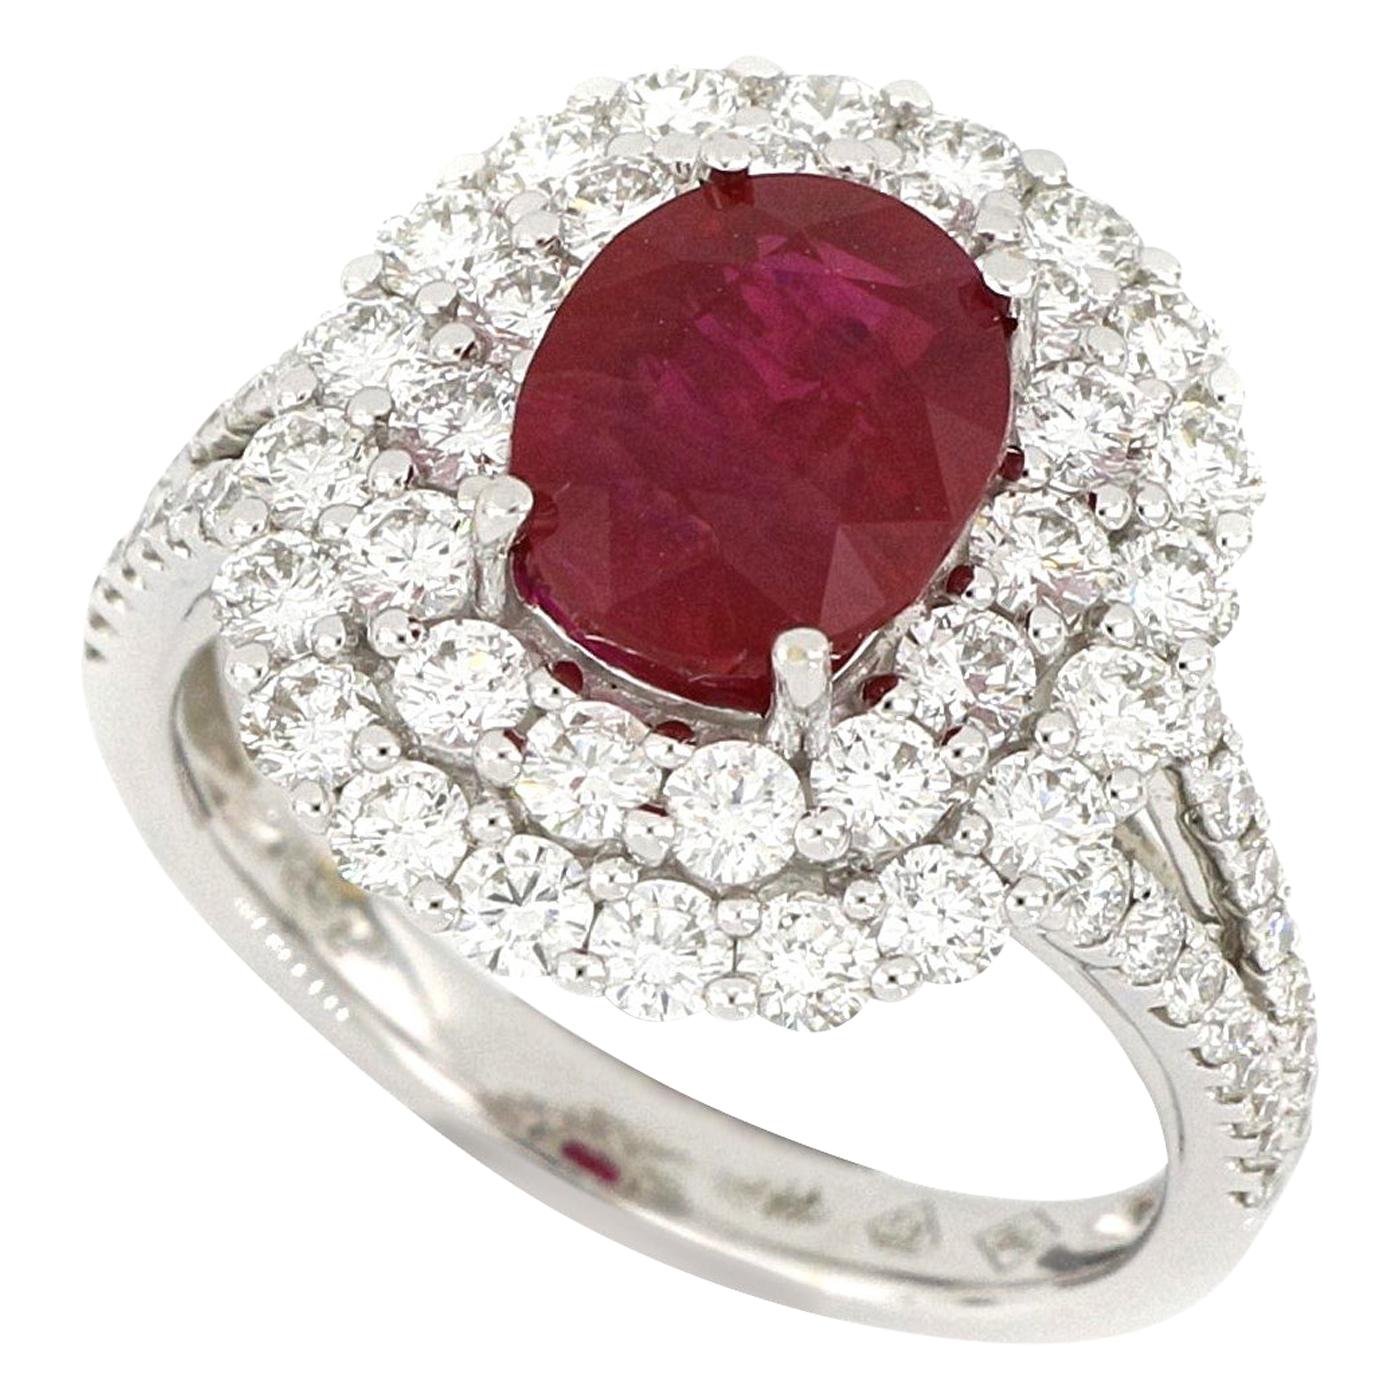 A Natural Ruby and Diamond Ring in 18 Karat White Gold